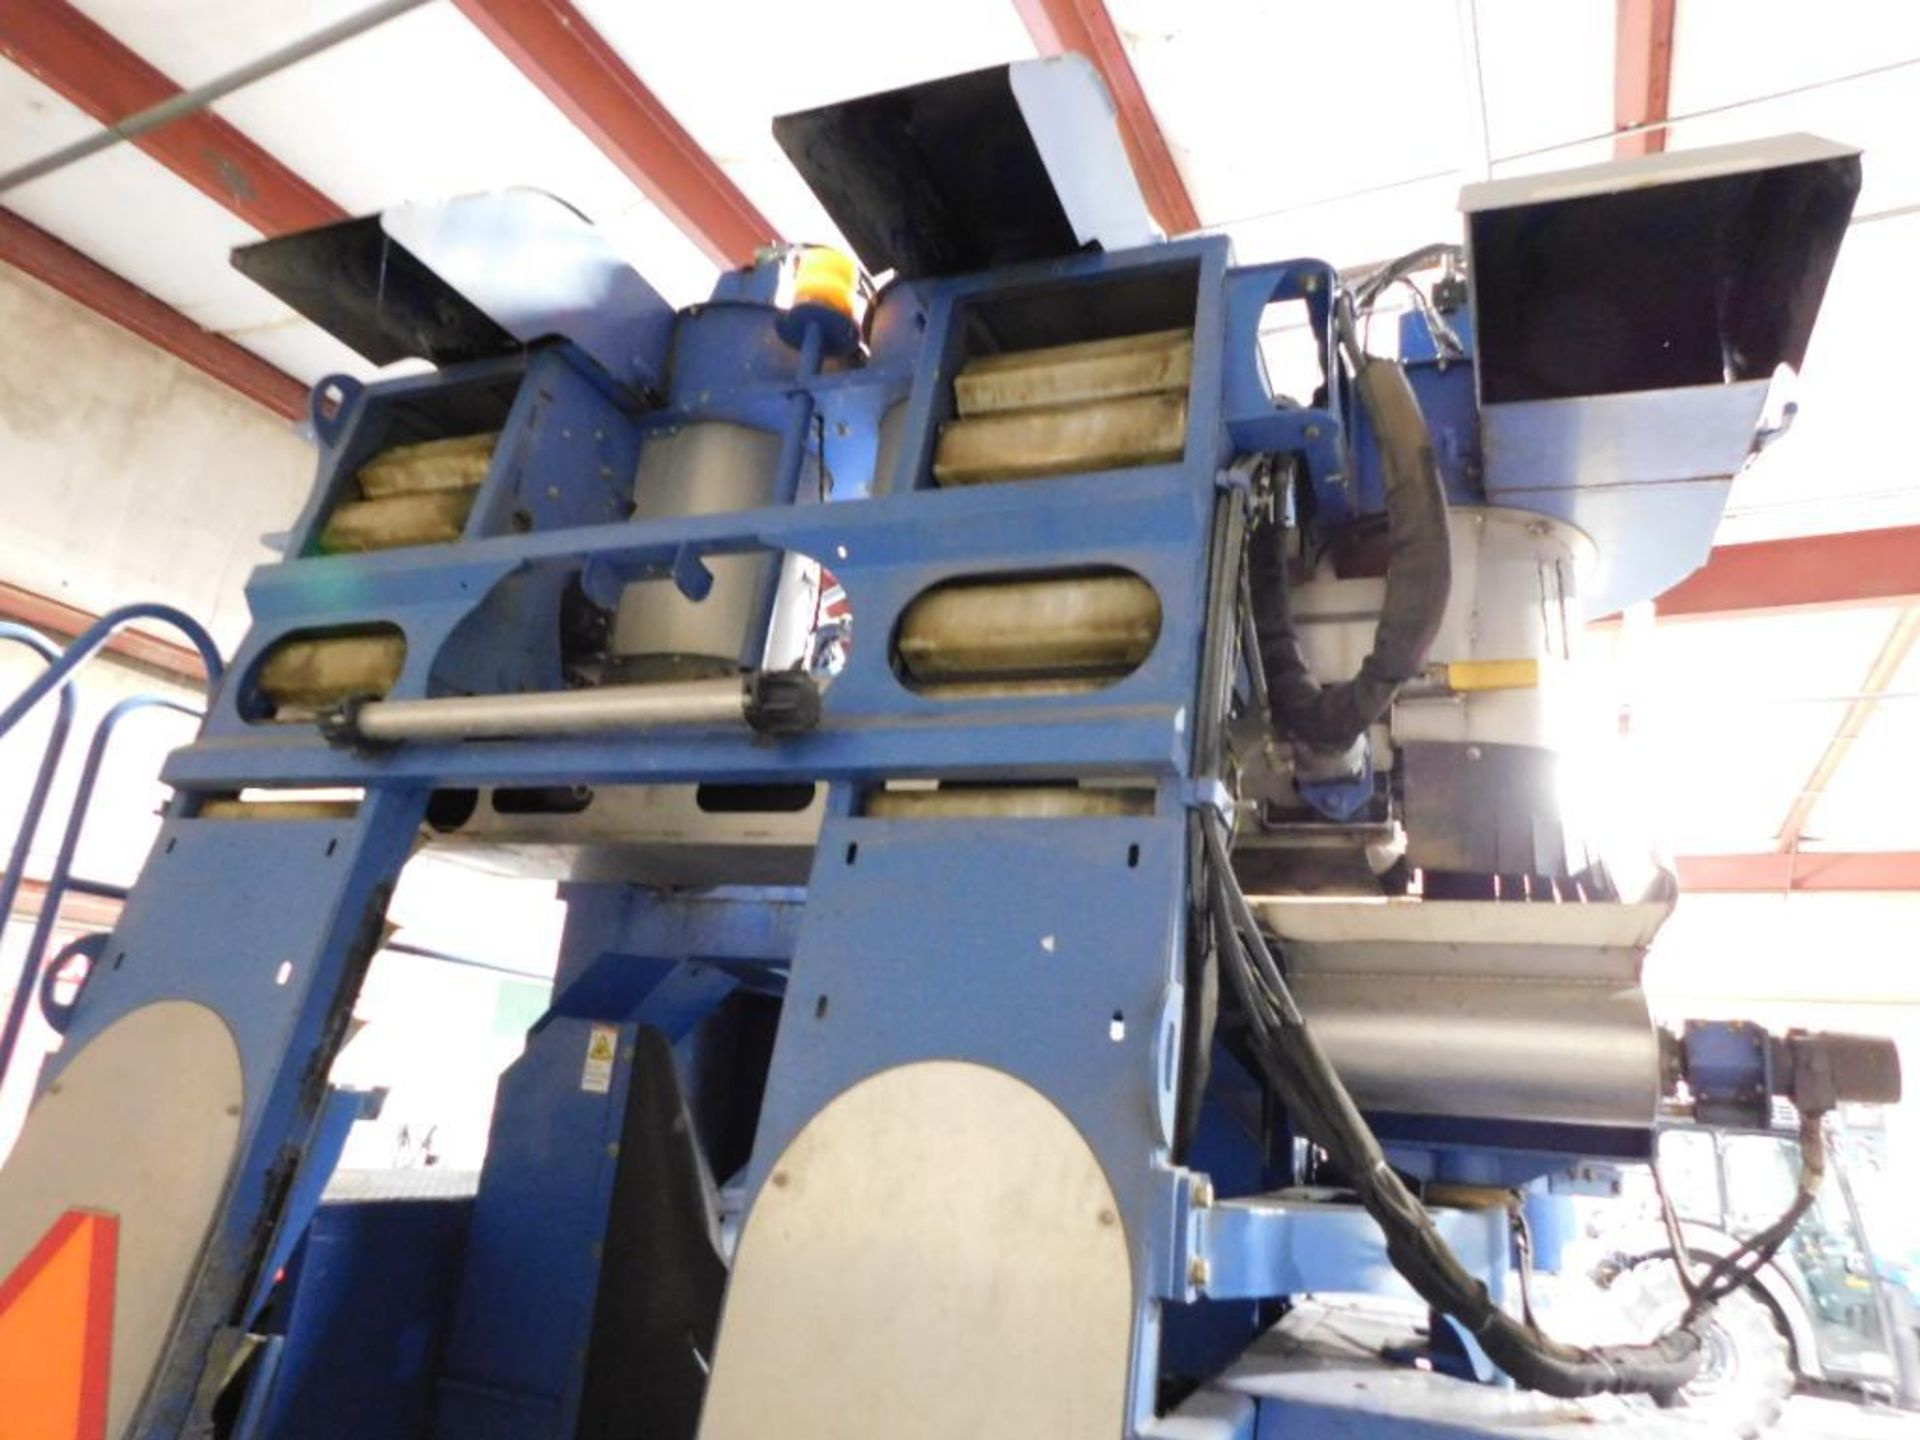 Oxbo 316XL Grape Harvester (LOCATED IN MAINTENANCE AREA) - Image 7 of 9